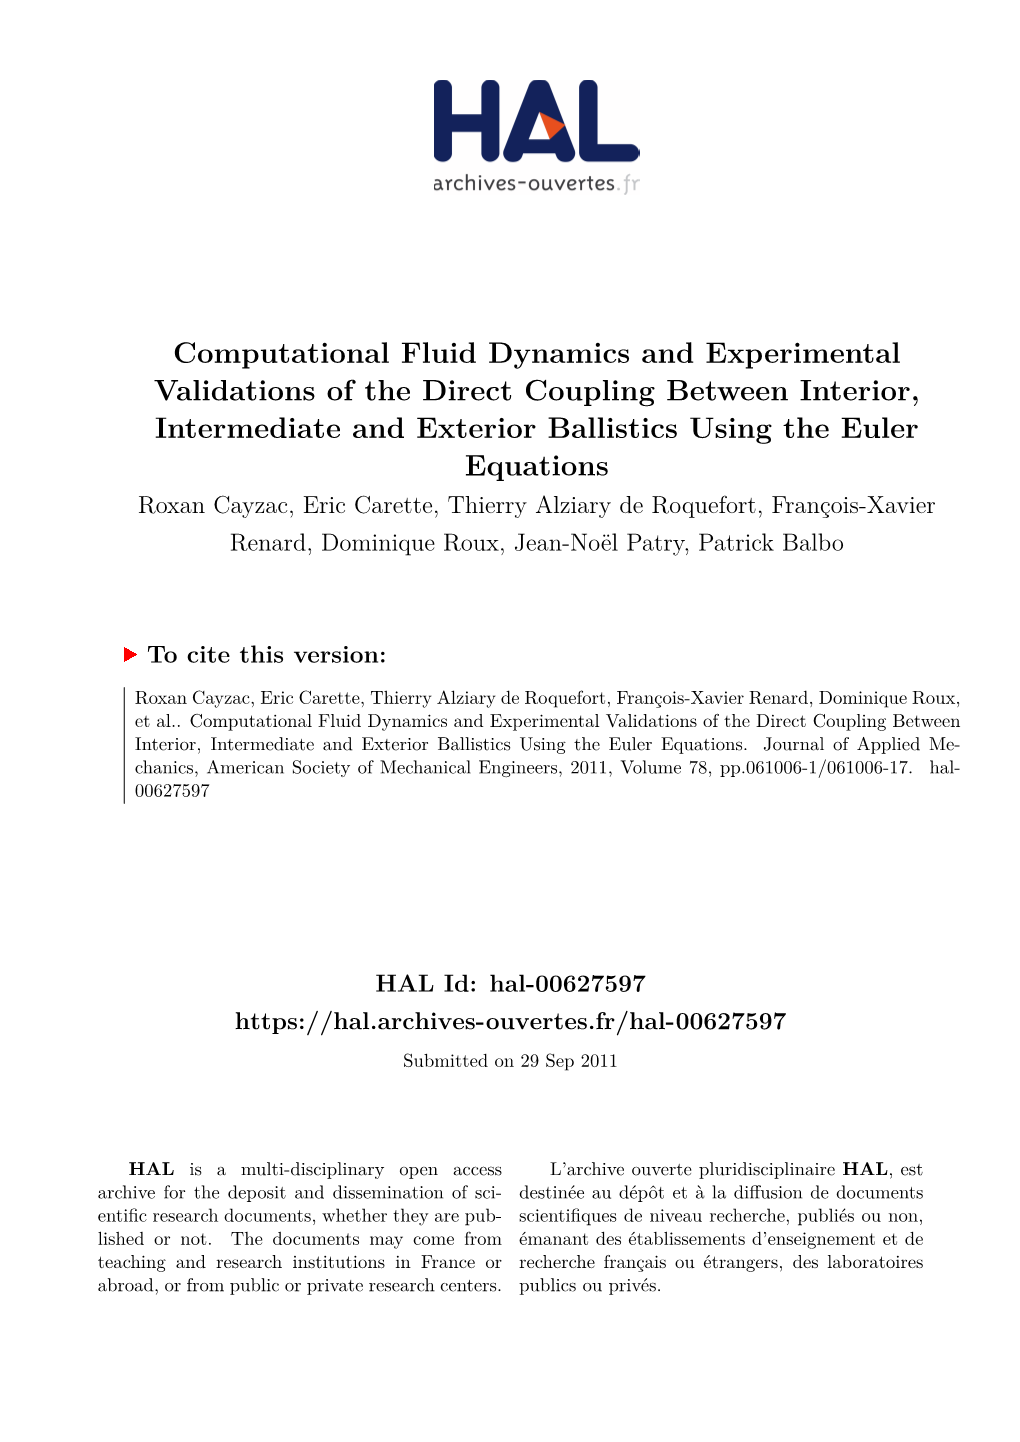 Computational Fluid Dynamics and Experimental Validations of The